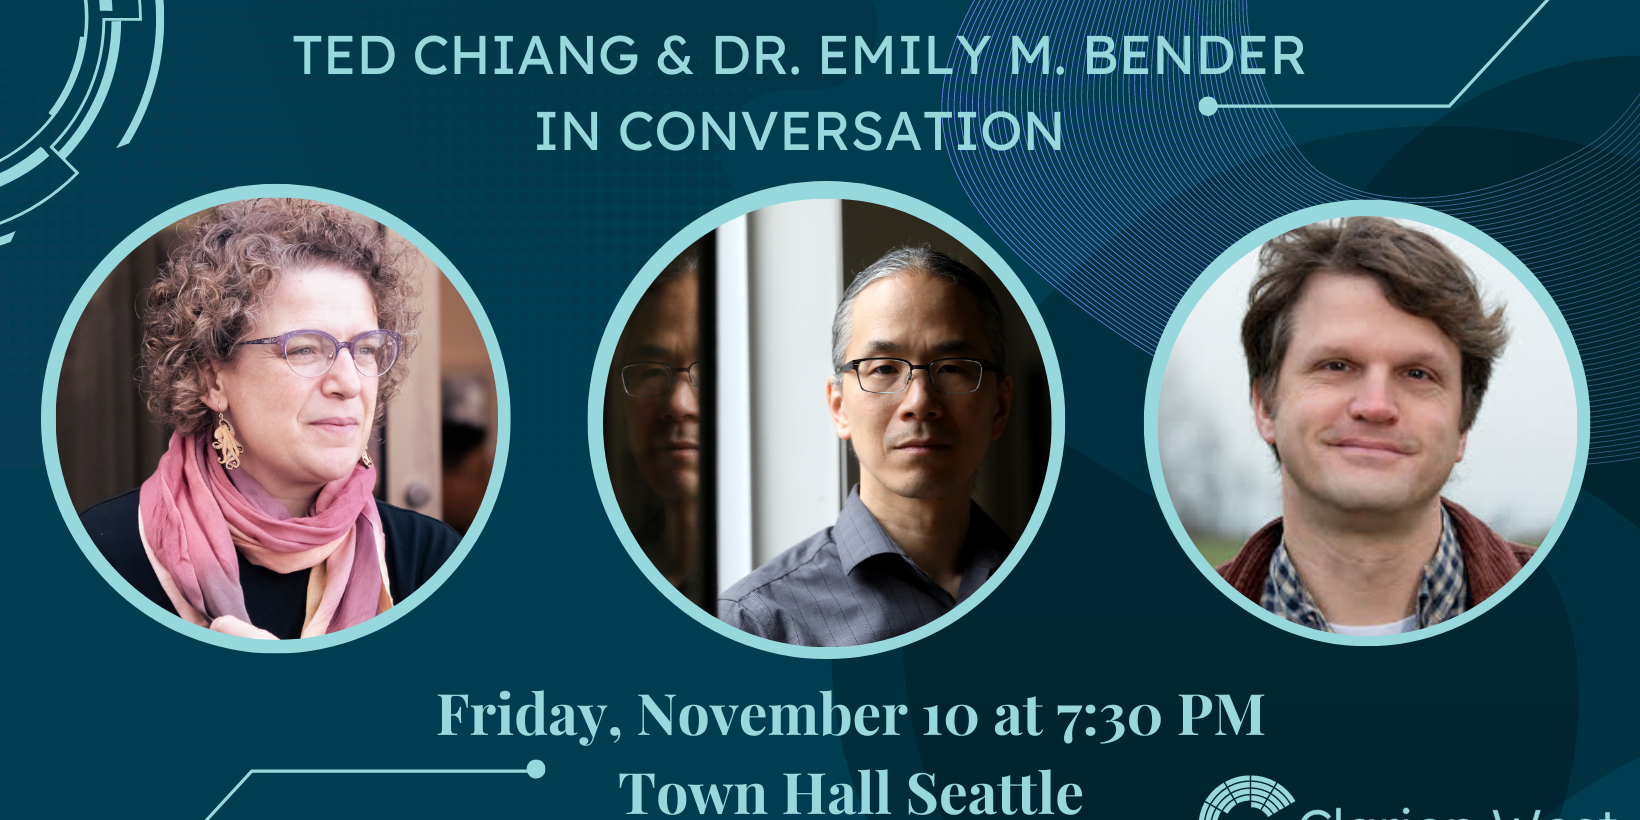 Ted Chiang and Dr. Emily M. Bender – Town Hall Seattle